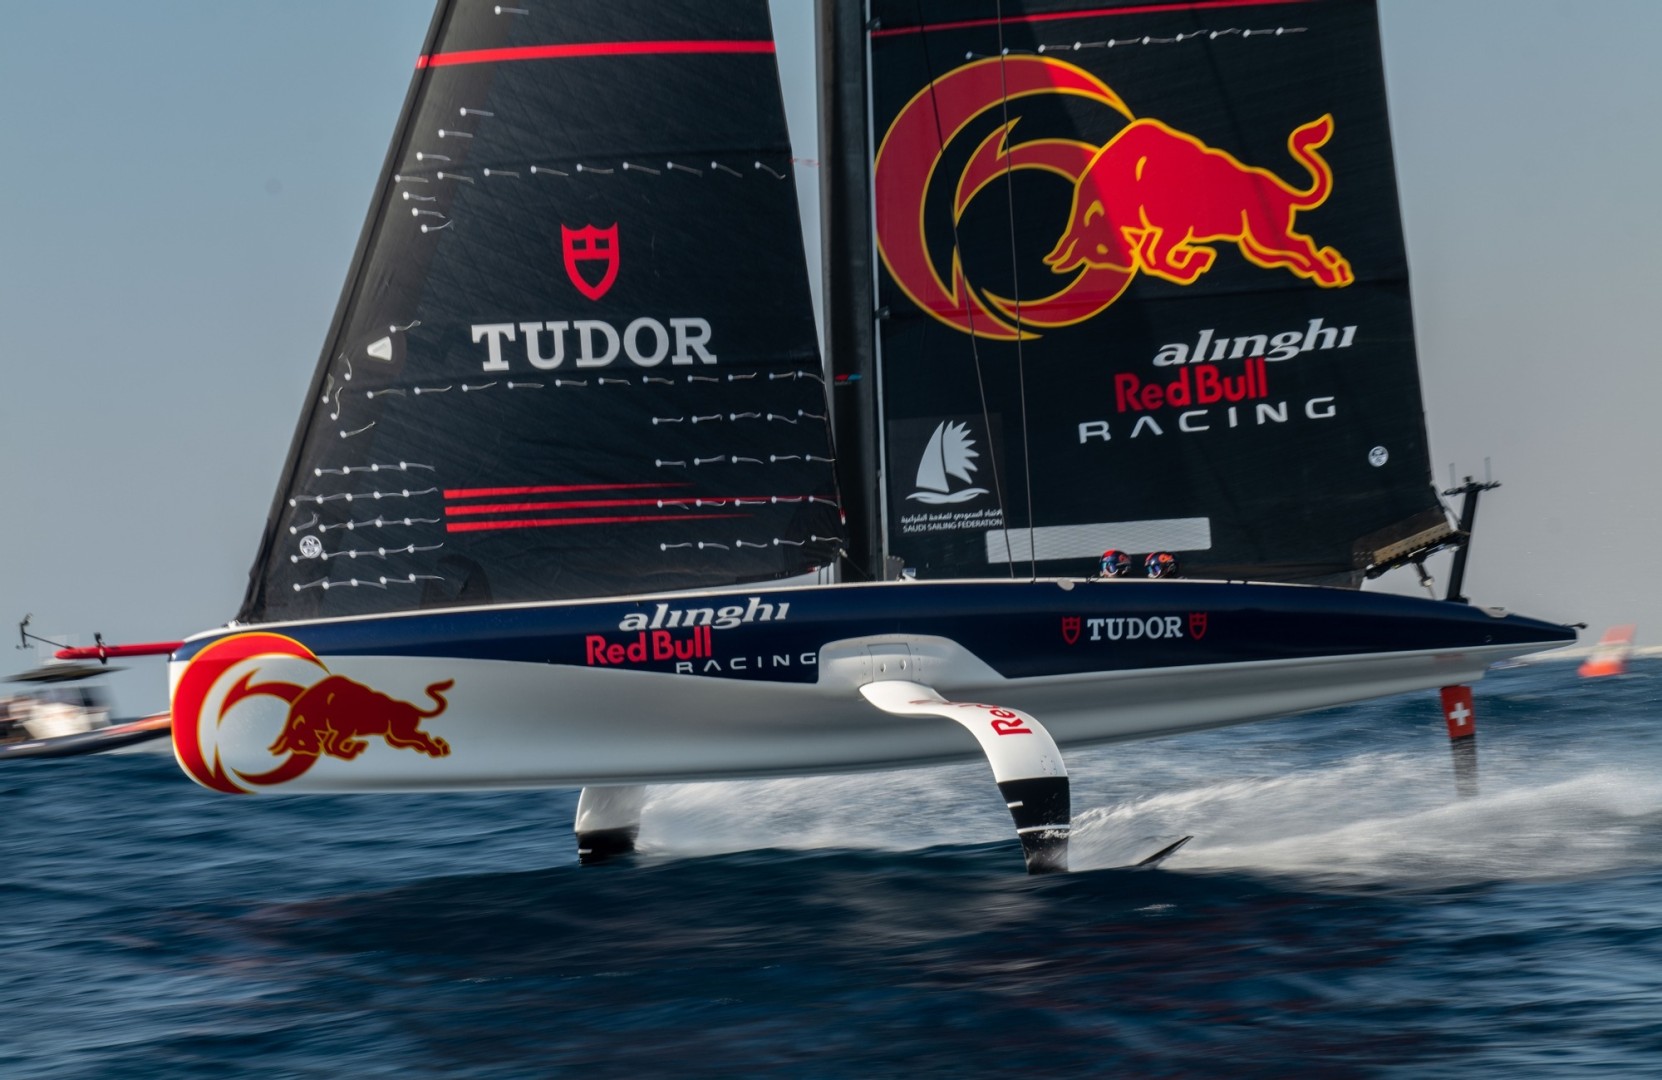 Rinse and repeat for Alinghi Red Bull Racing